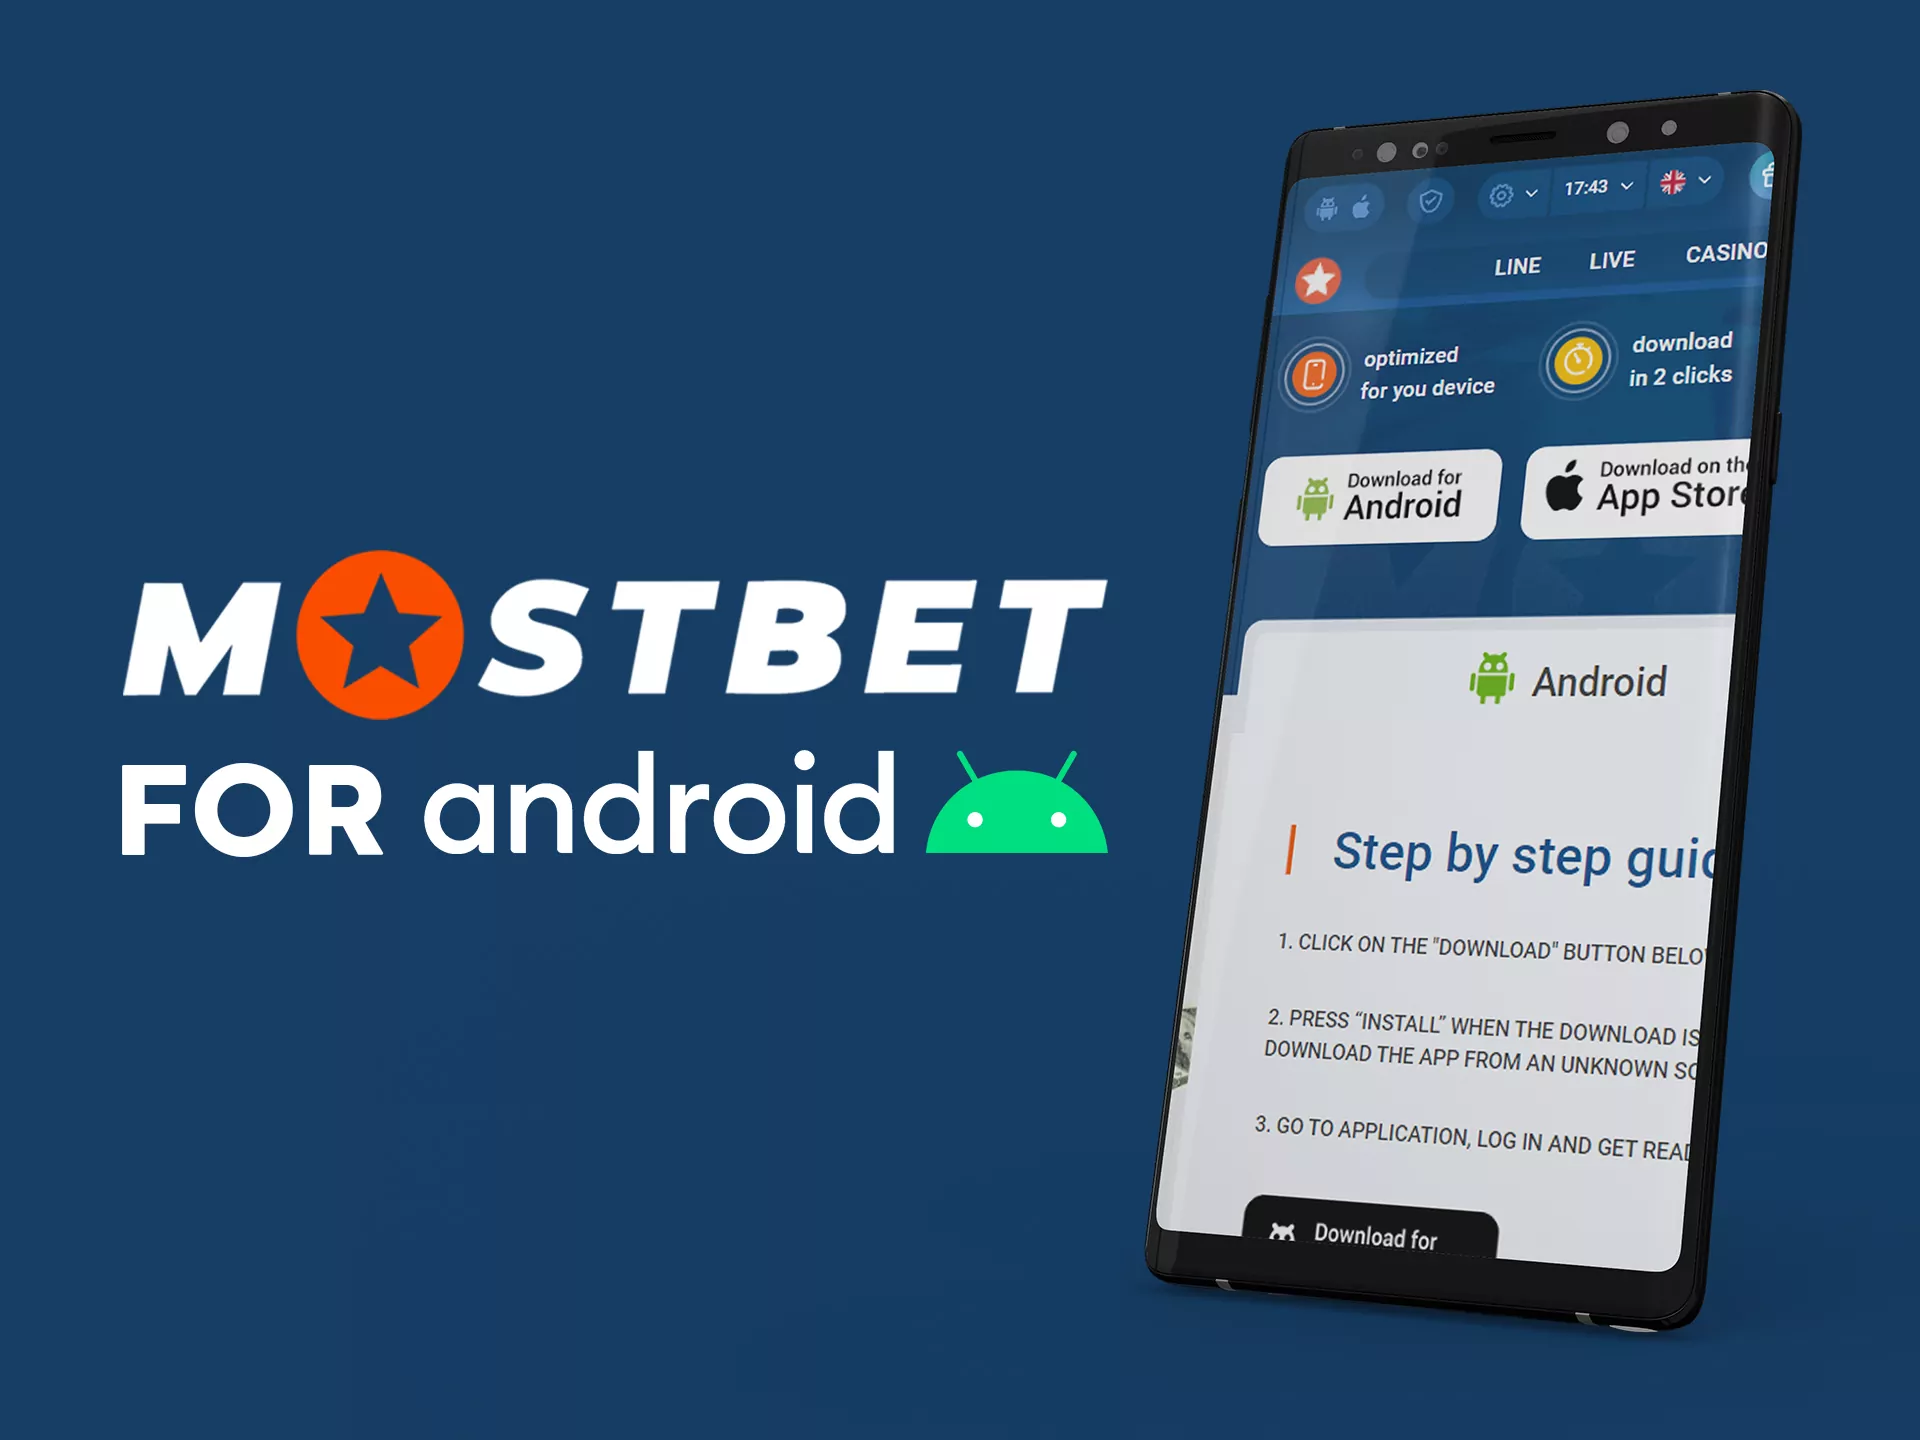 Get the Mostbet App for your Android device from the official site.